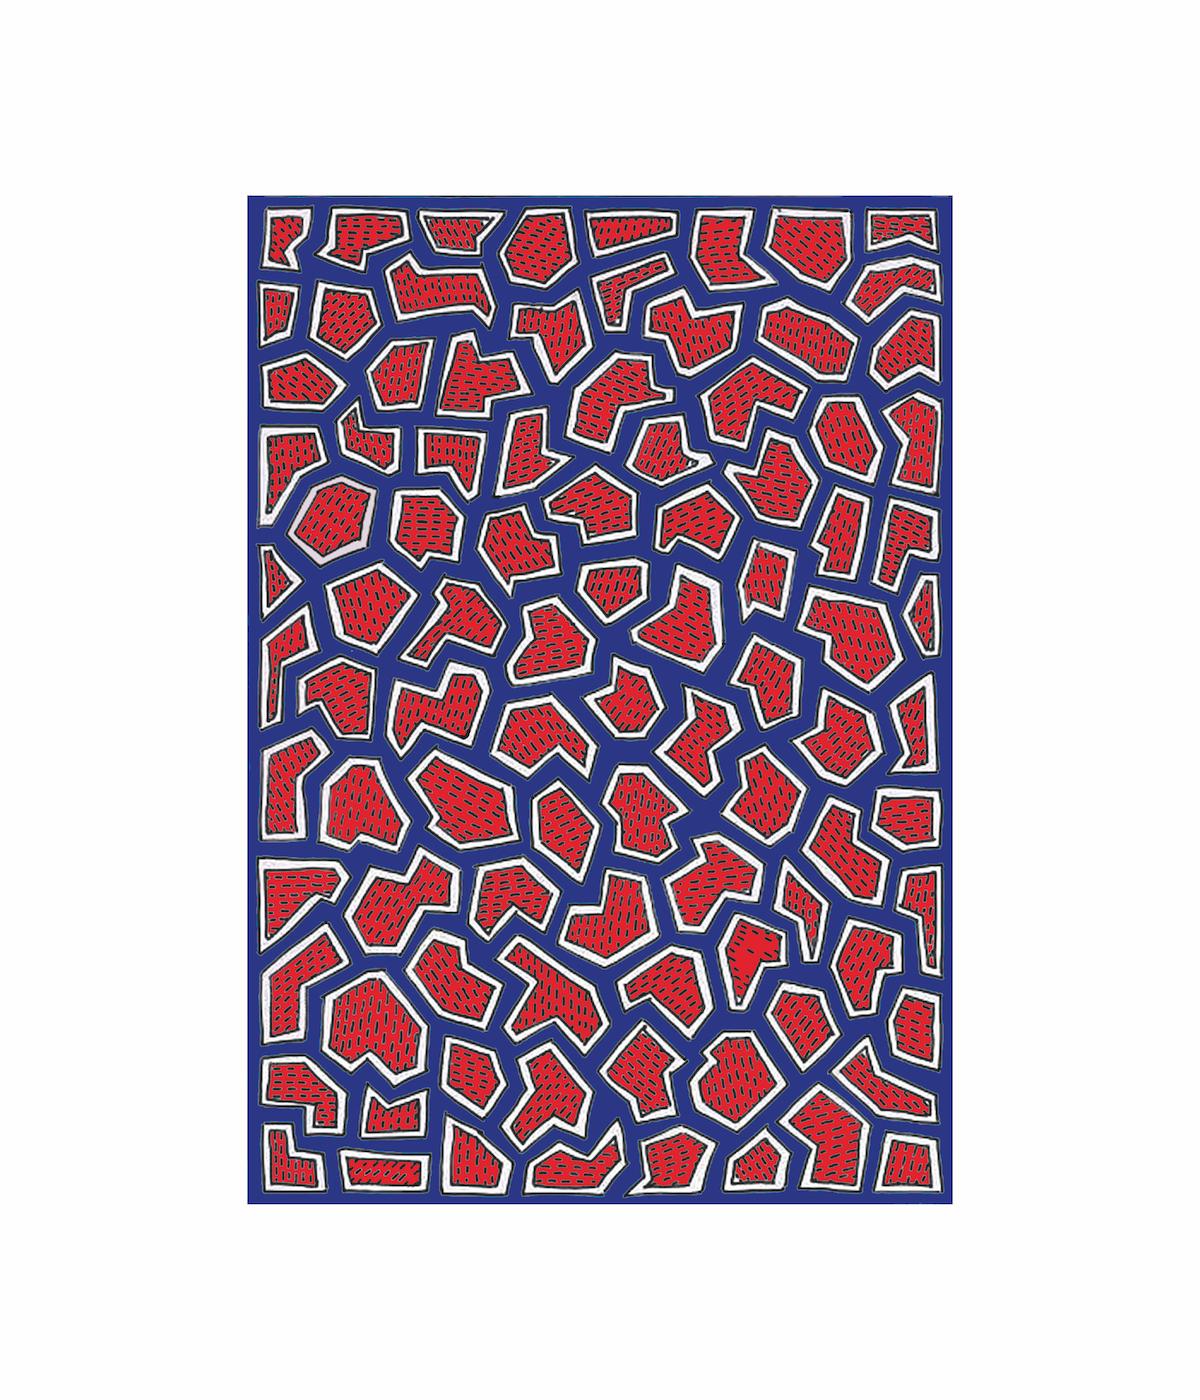 France is a hyper graphic rug, typical of Nathalie du Pasquier’s iconic designs from the Memphis movement of which she was the graphic designer in the 80’s. Nathalie used the colors of the French flag for her first collaboration with a French brand.